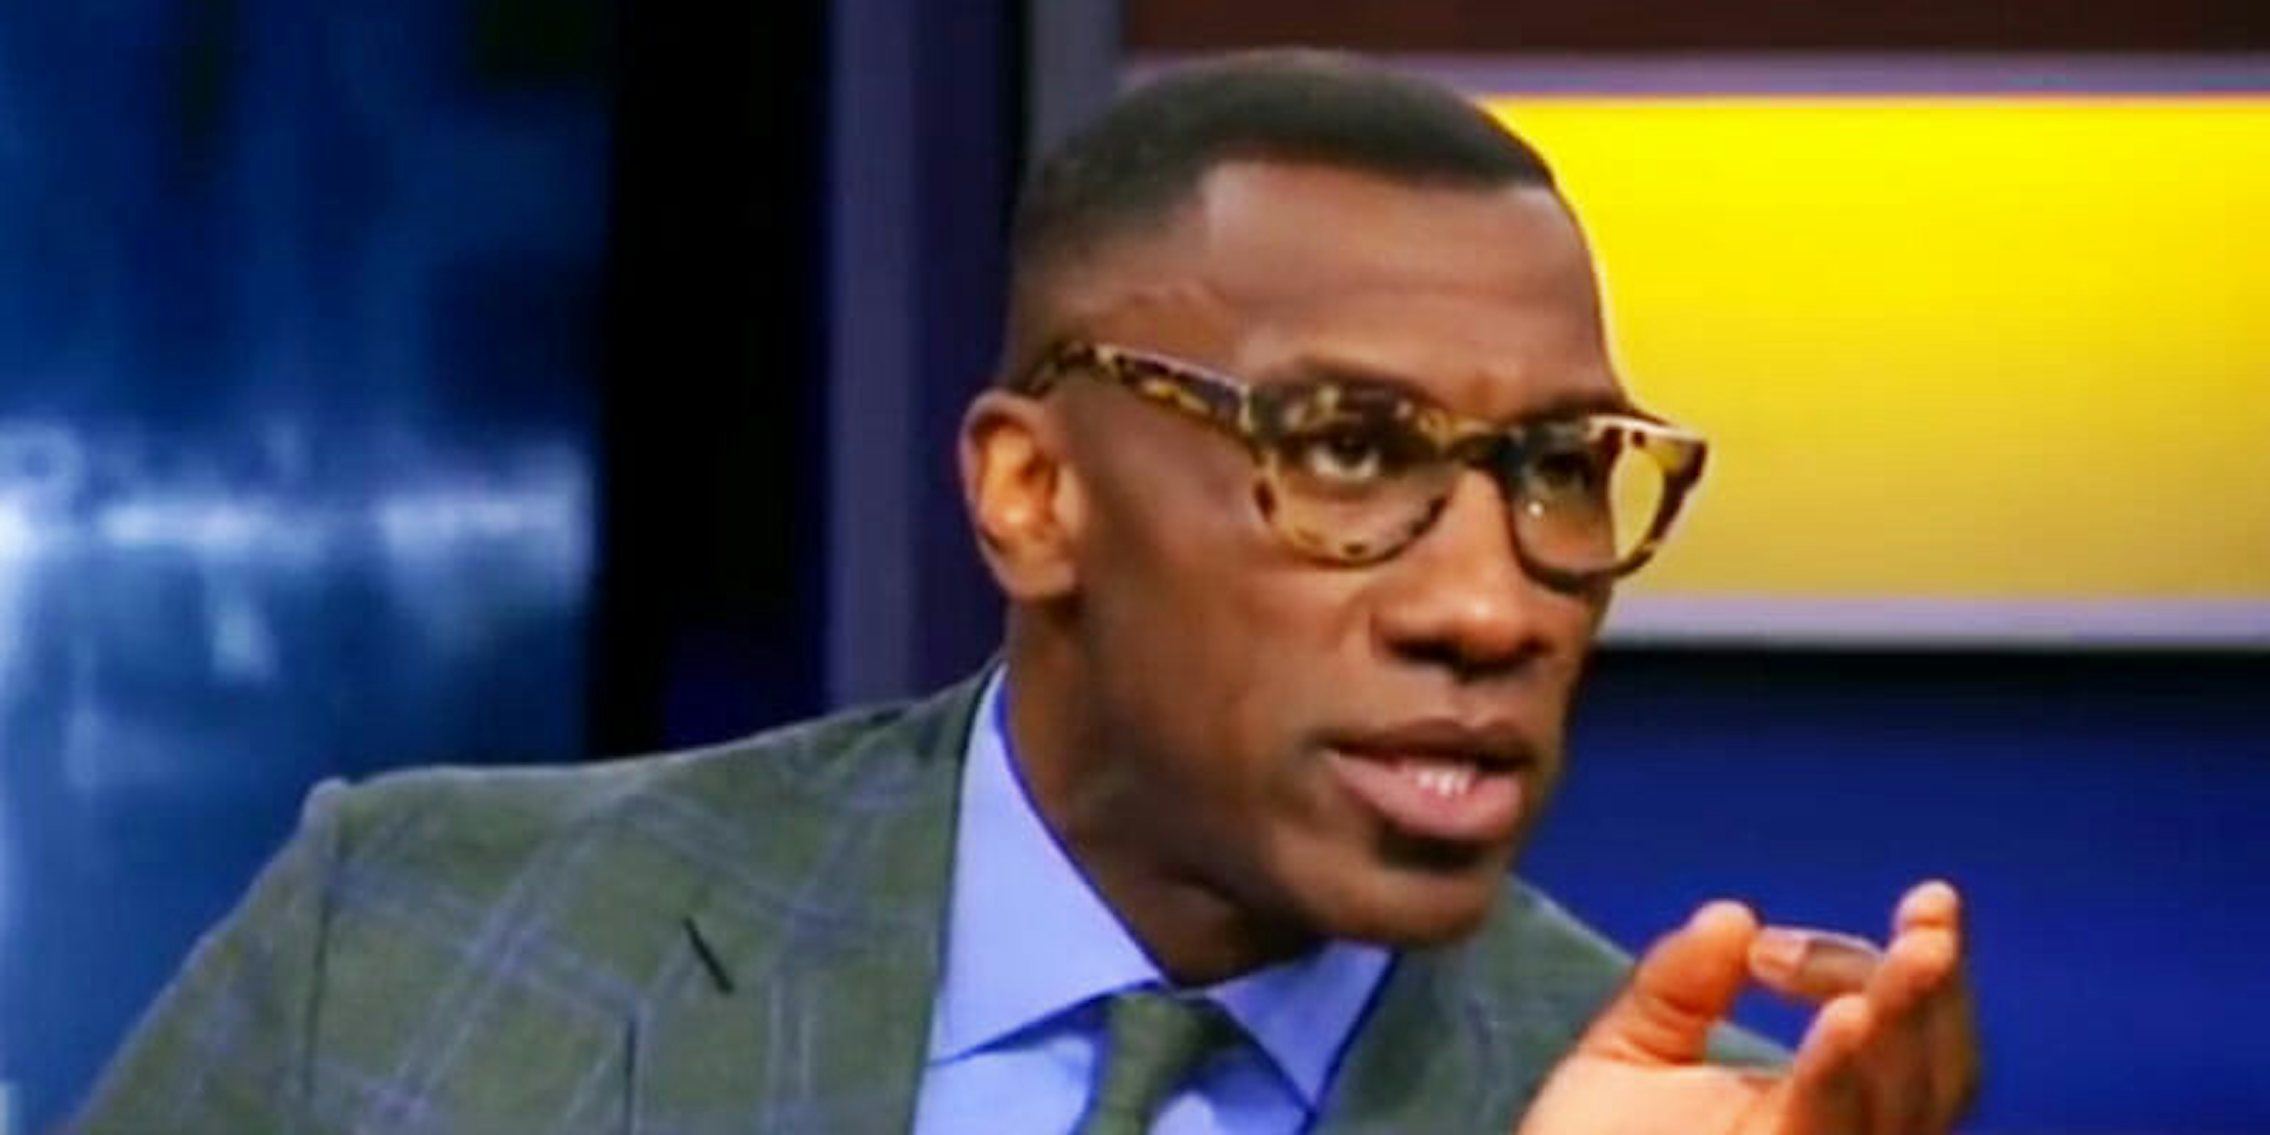 Shannon Sharpe Memes: Here Are Some of the Best